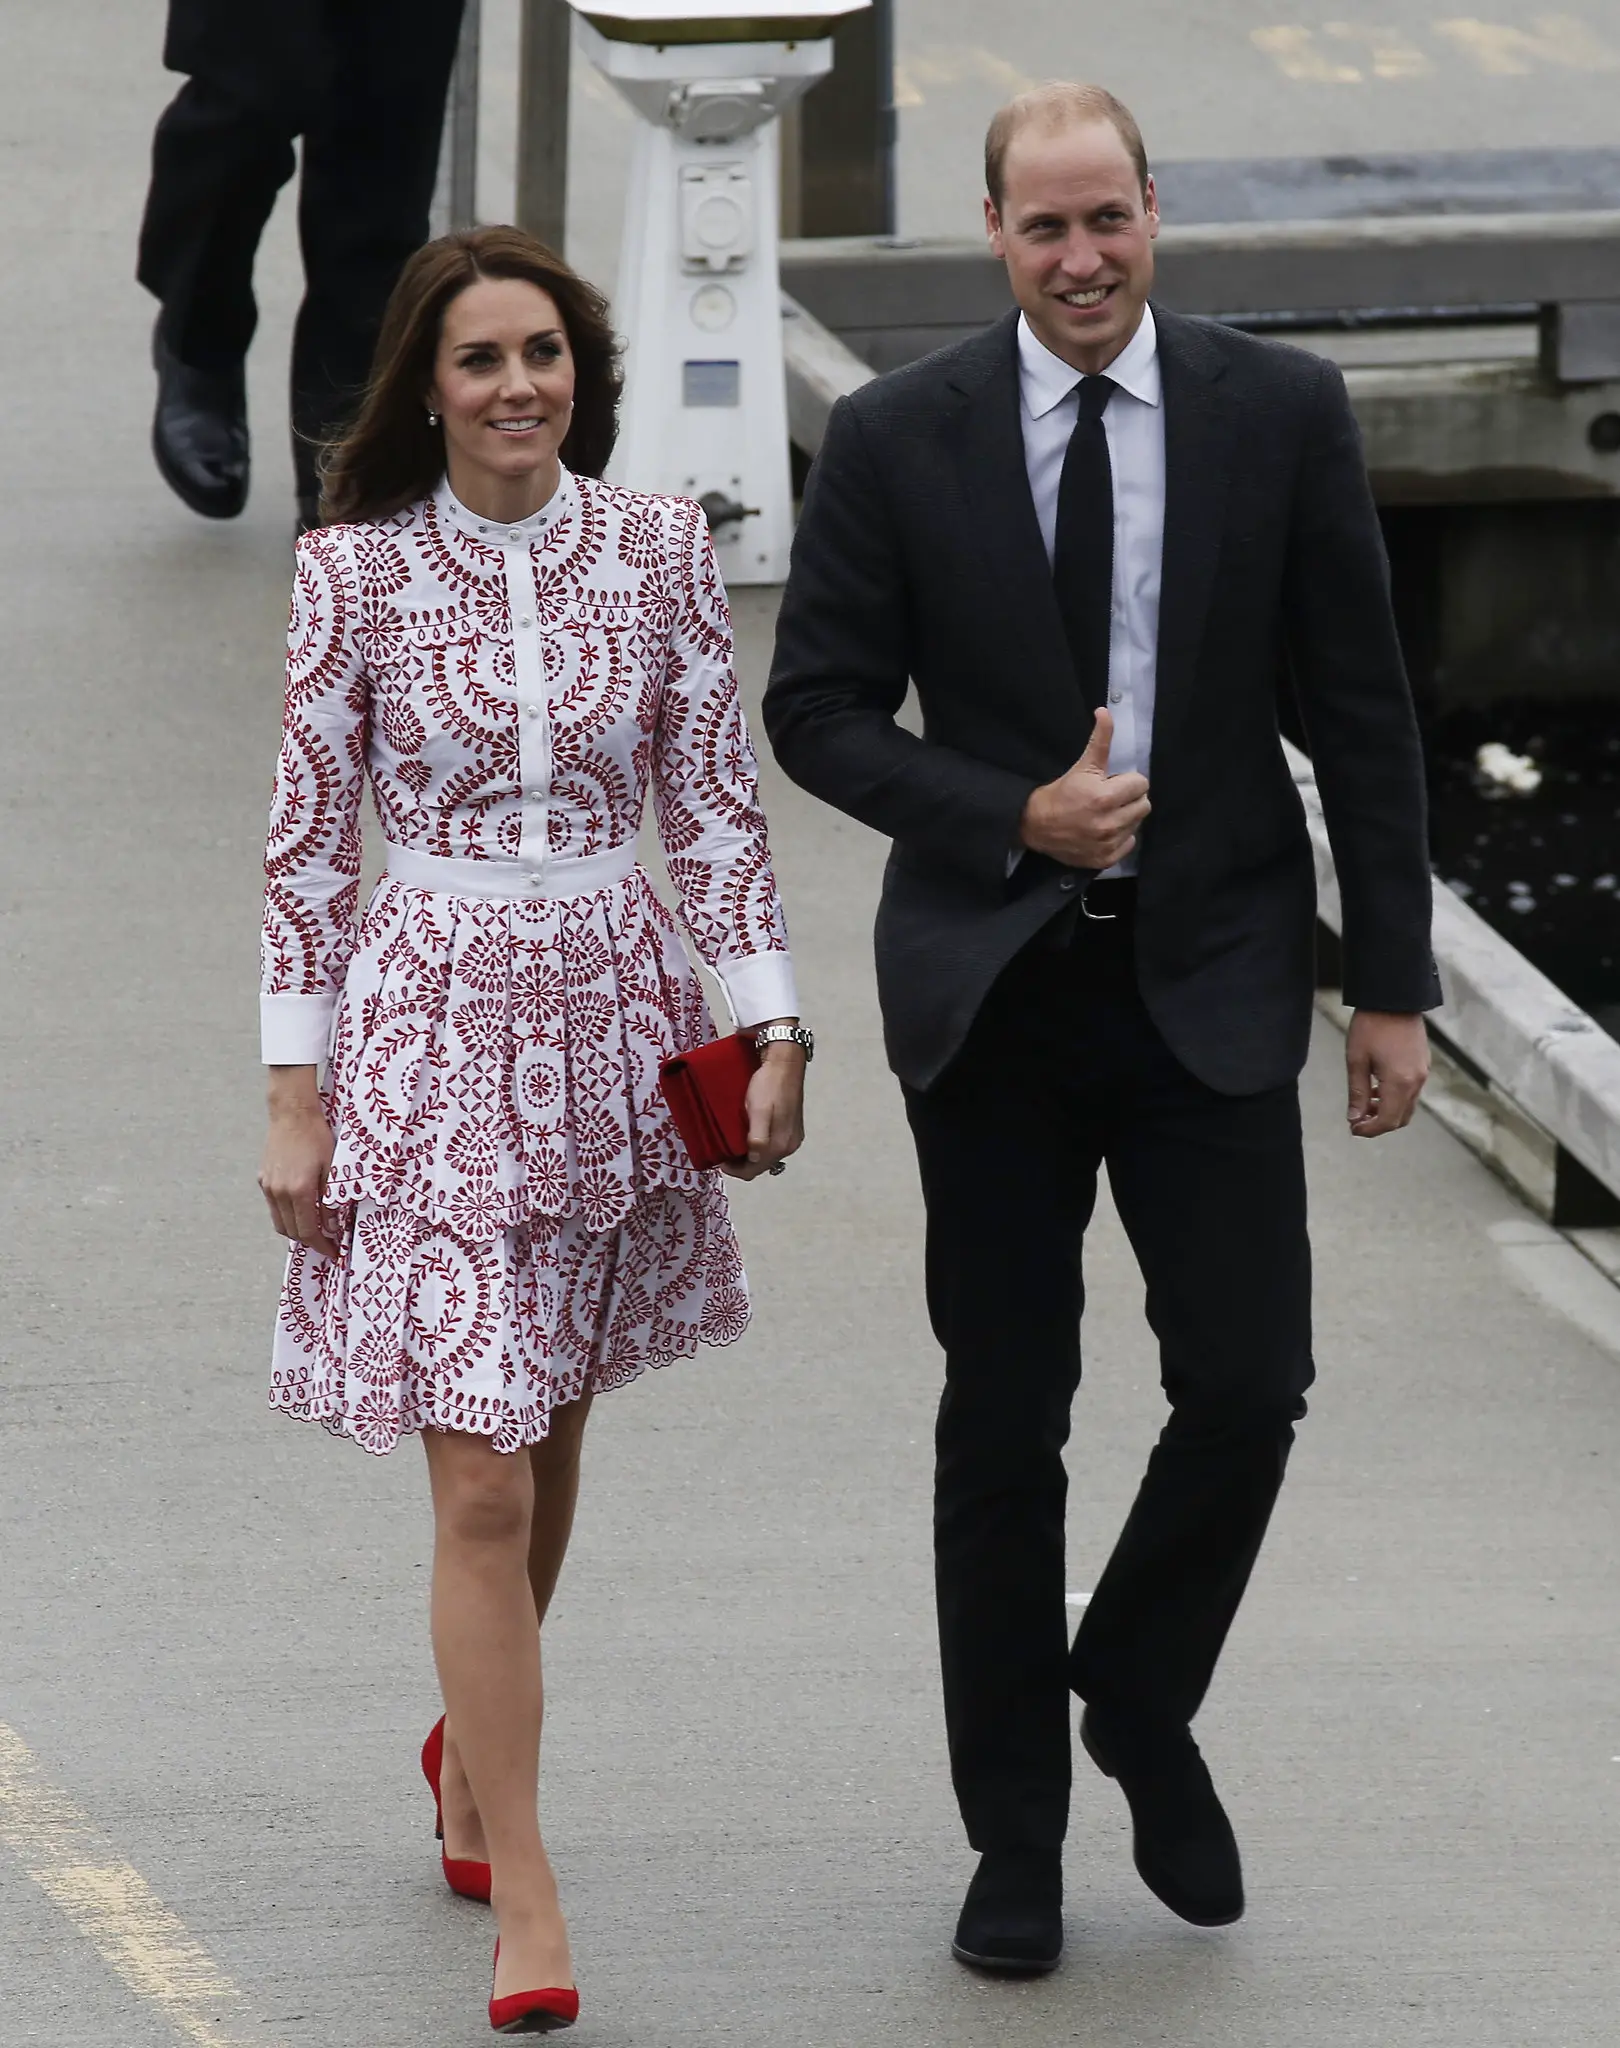 The Duke and Duchess of Cambridge travelled to Vancouver in 2016